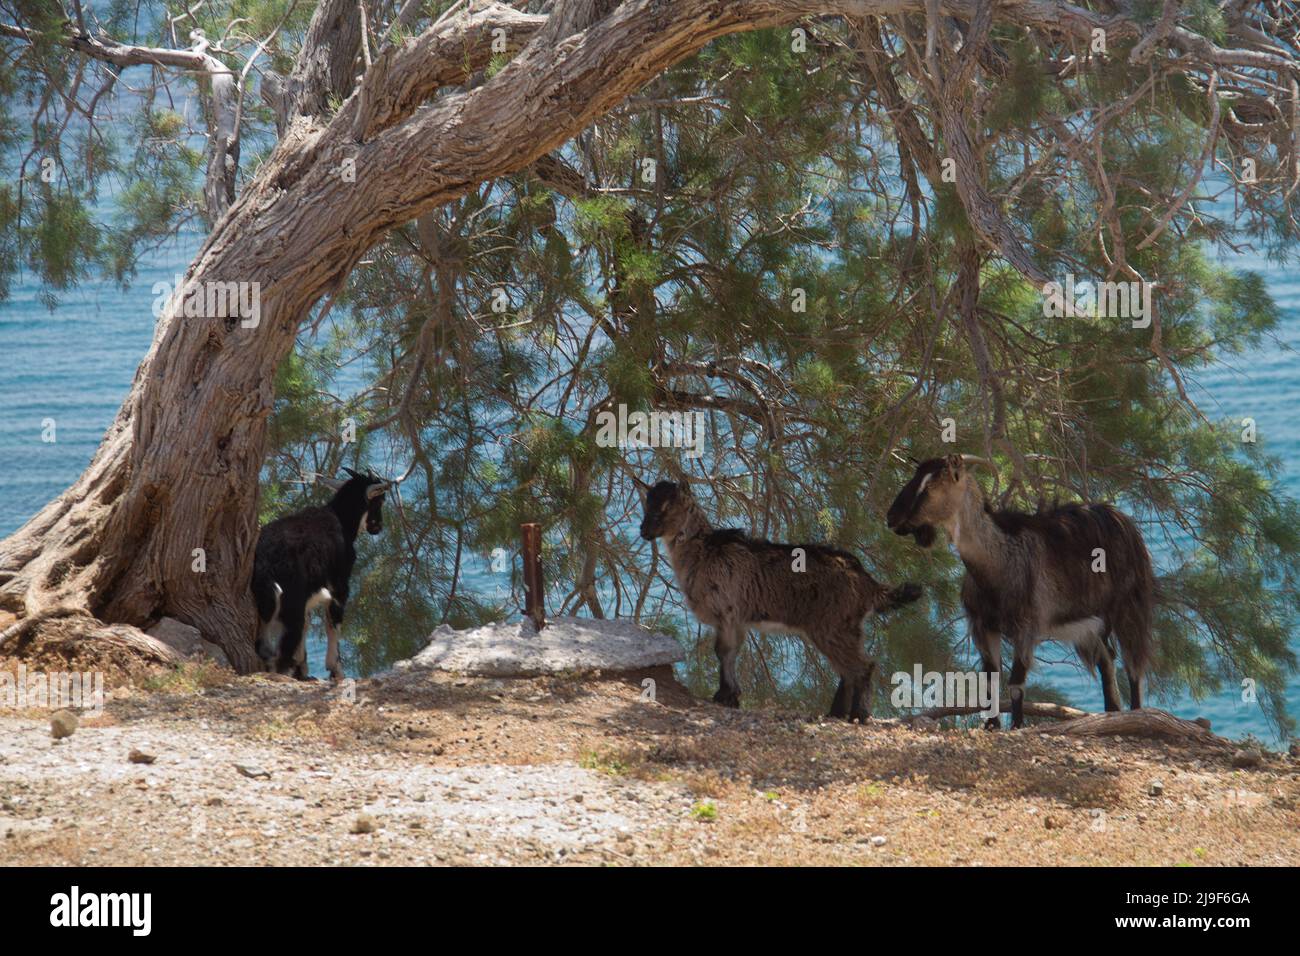 Three goats seek shelter from the sun in the shade of a Tamarisk tree near the blue sea Stock Photo